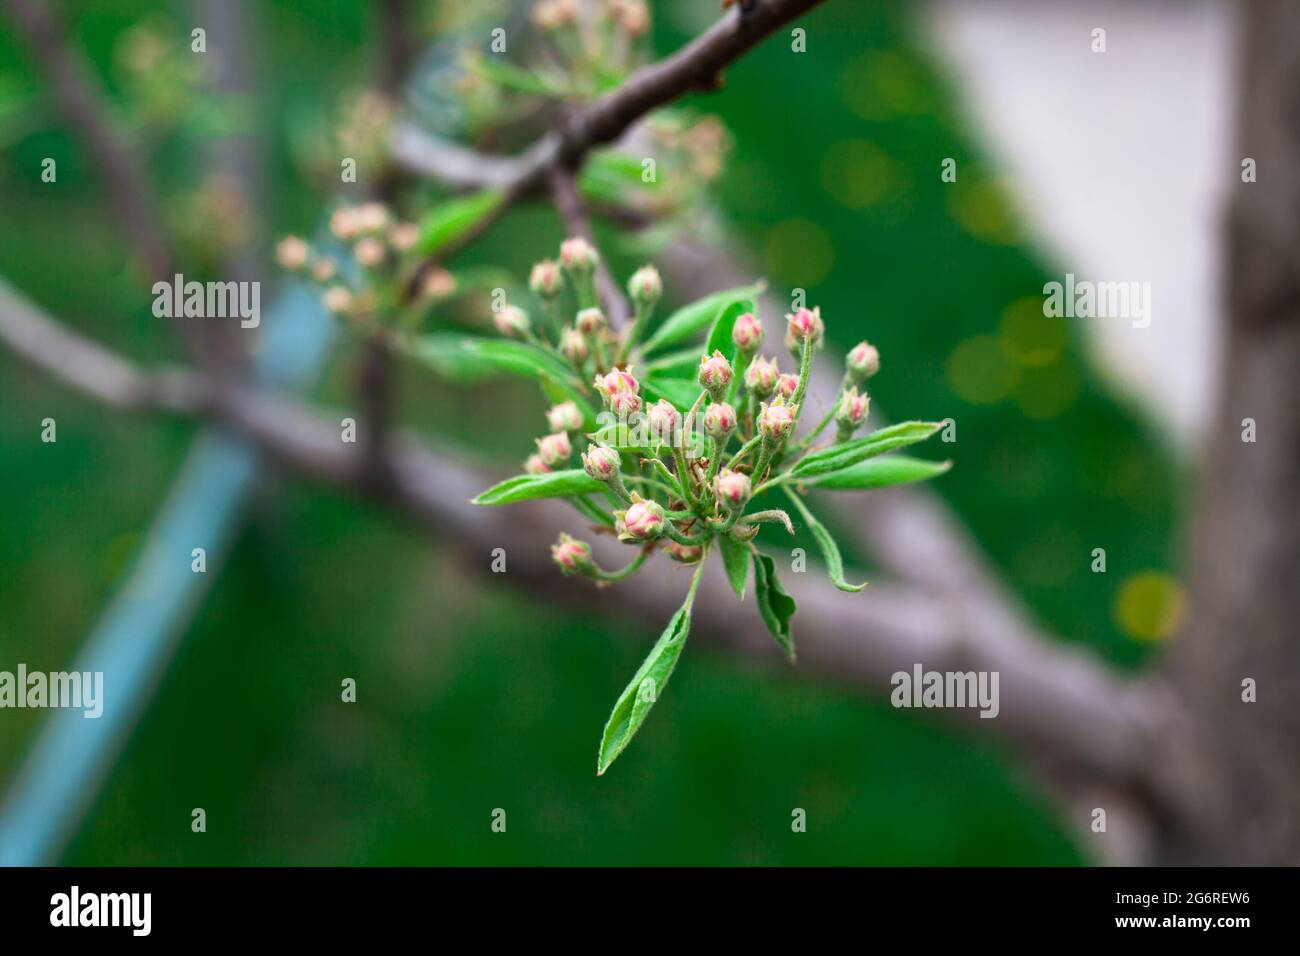 Pink apple blossoms and buds blooming close up. Buds with green leaves. Macro photography shoot with soft bokeh effect. Stock Photo